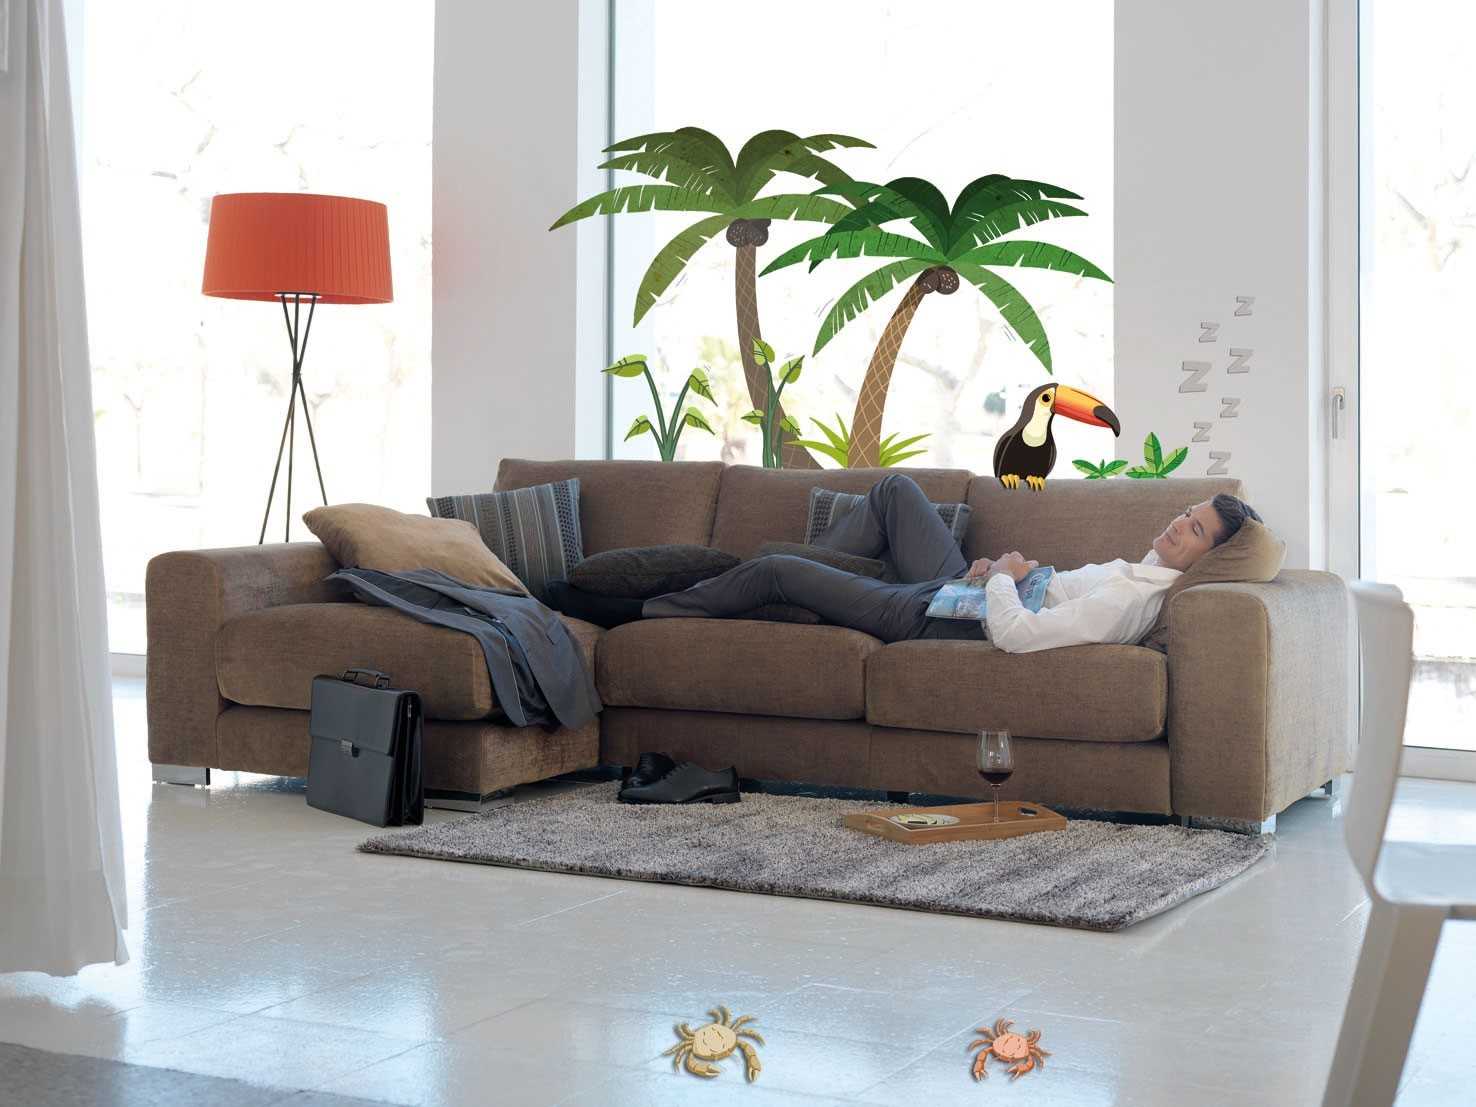 Is it good to fall asleep on your sofa?